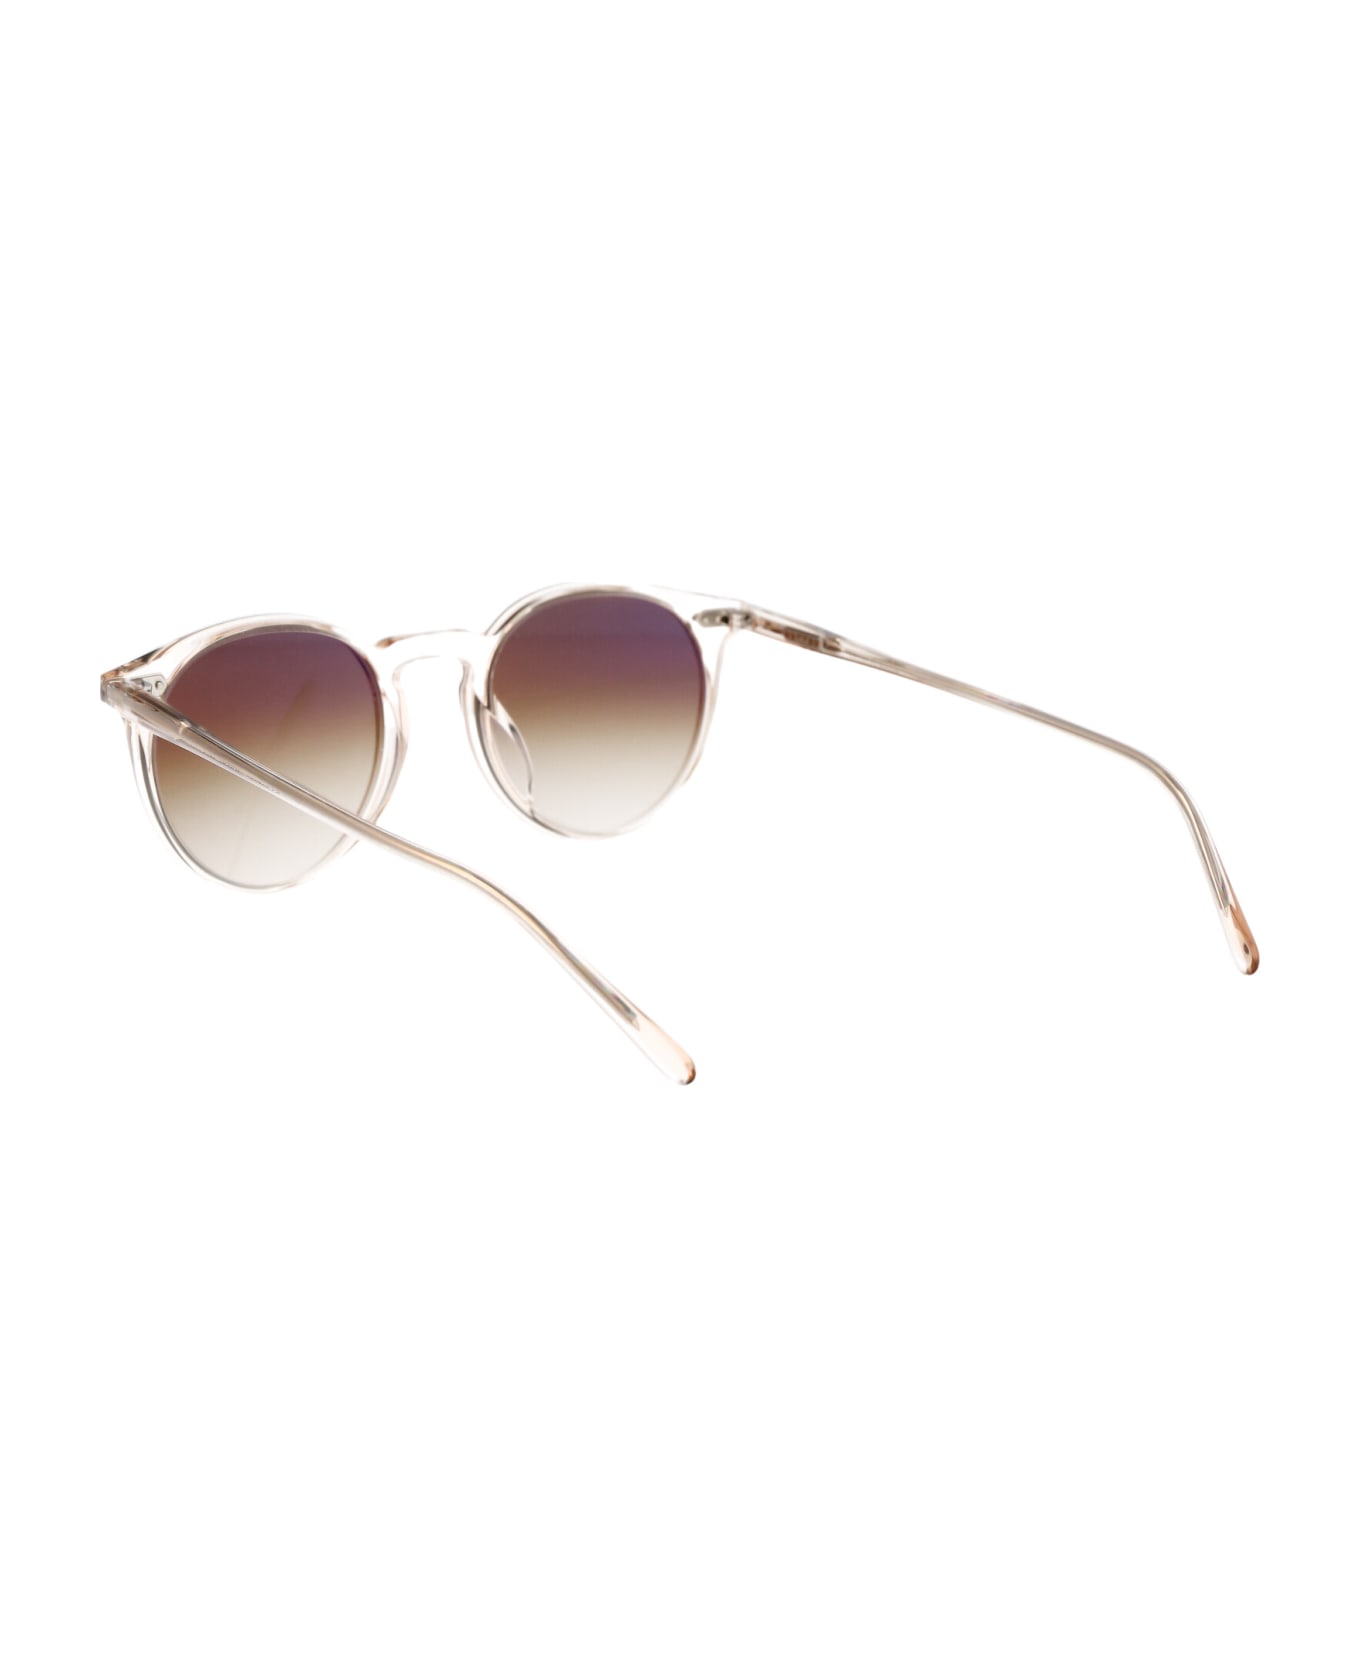 Oliver Peoples N.02 Sun Sunglasses - 1743Q1 Cherry Blossom